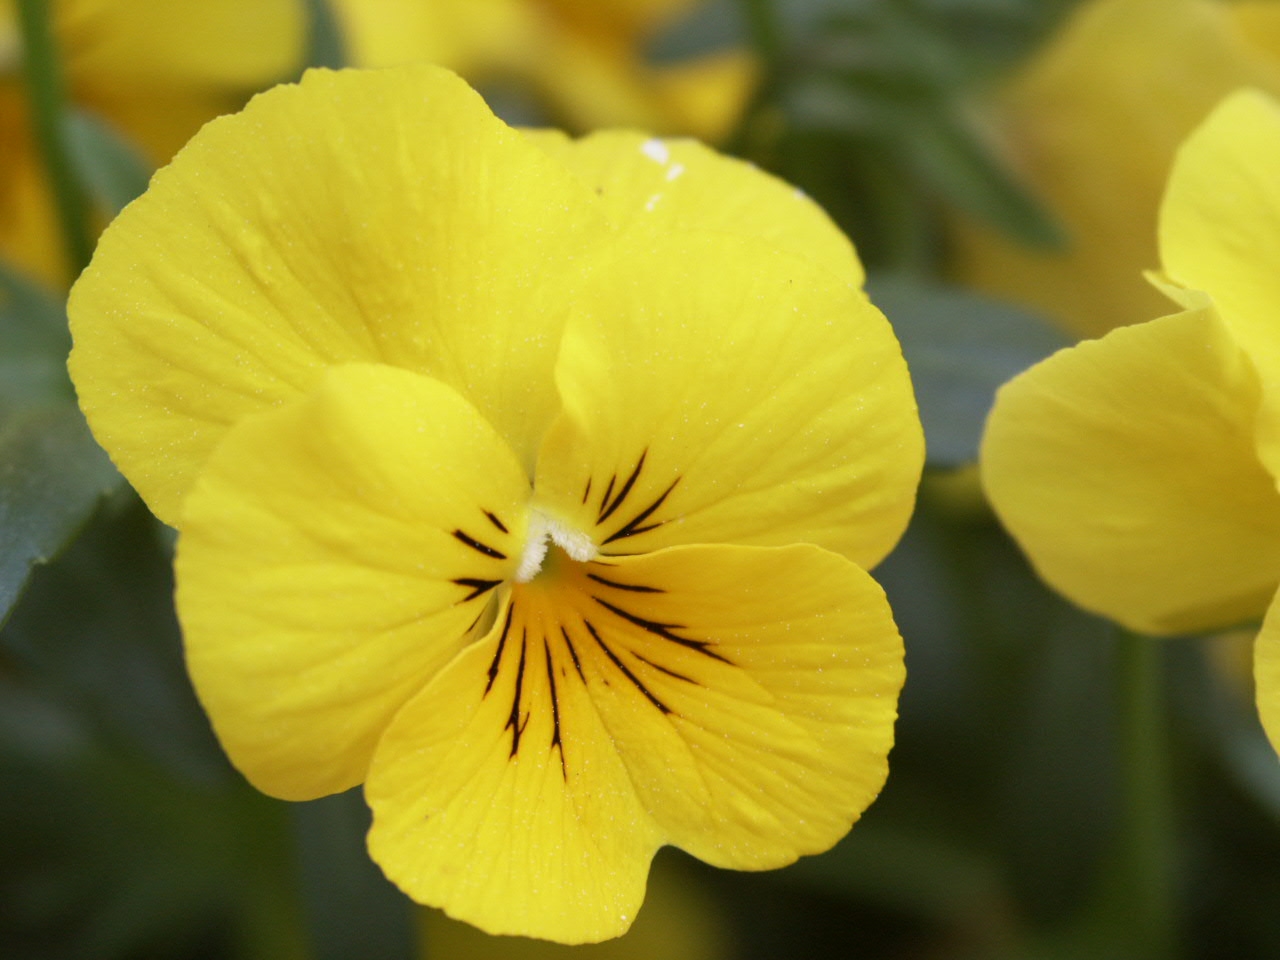 pansy flowers are eminently edible